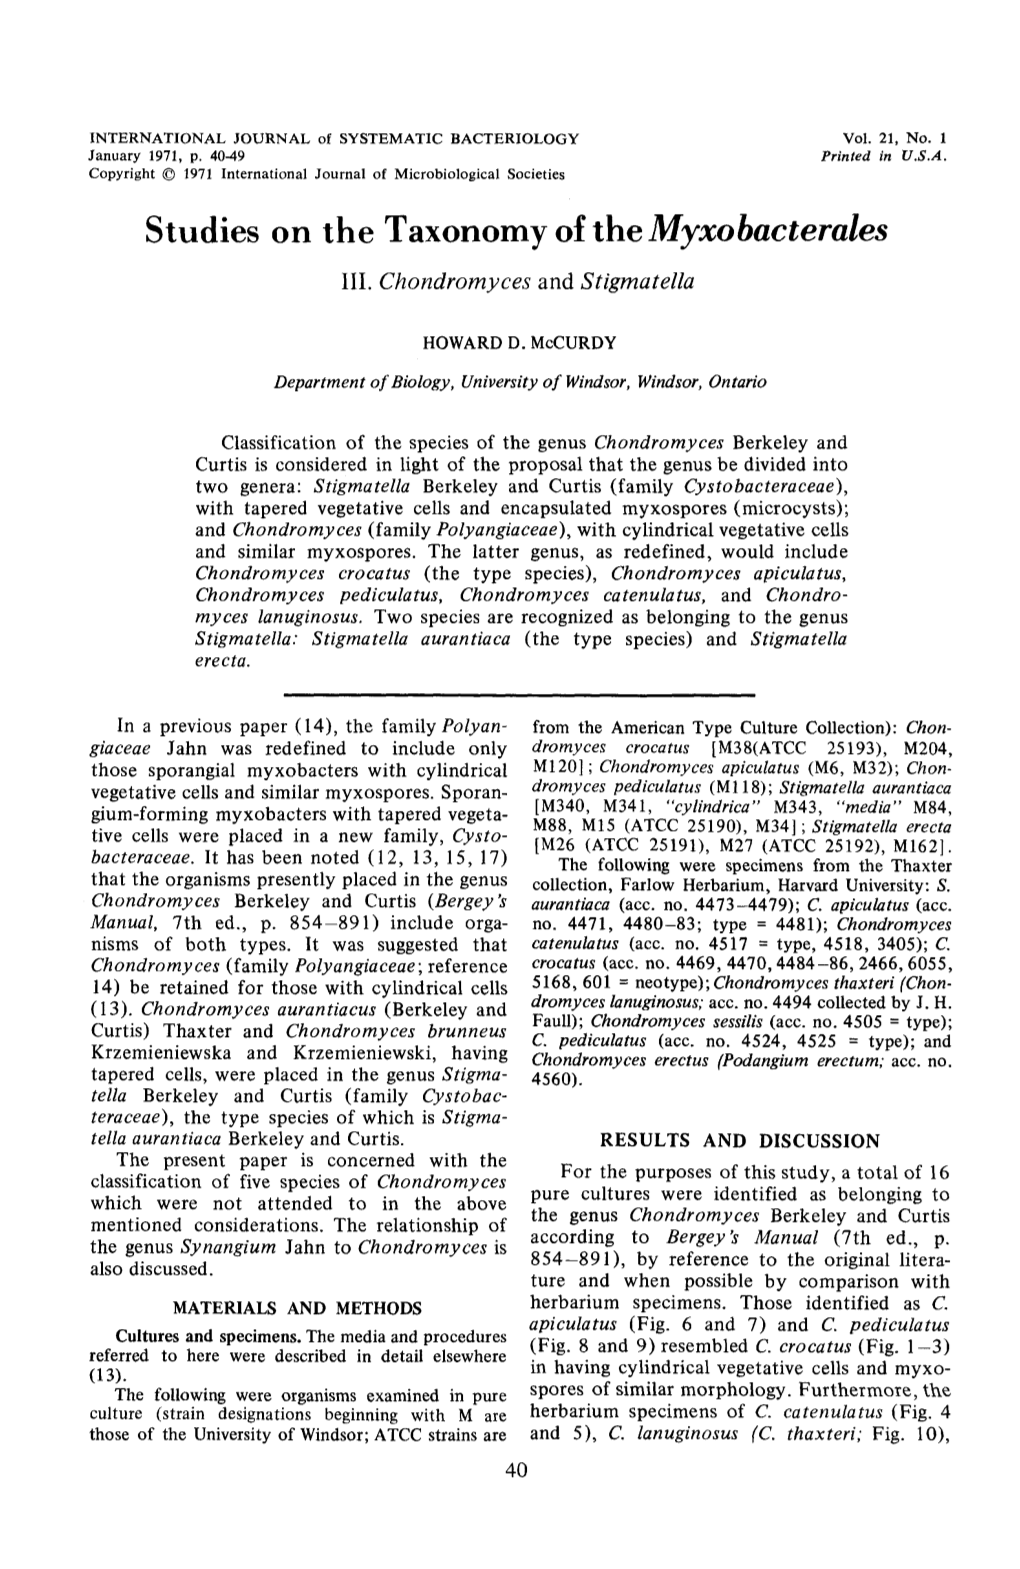 Studies on the Taxonomy of the Myxobacterales III